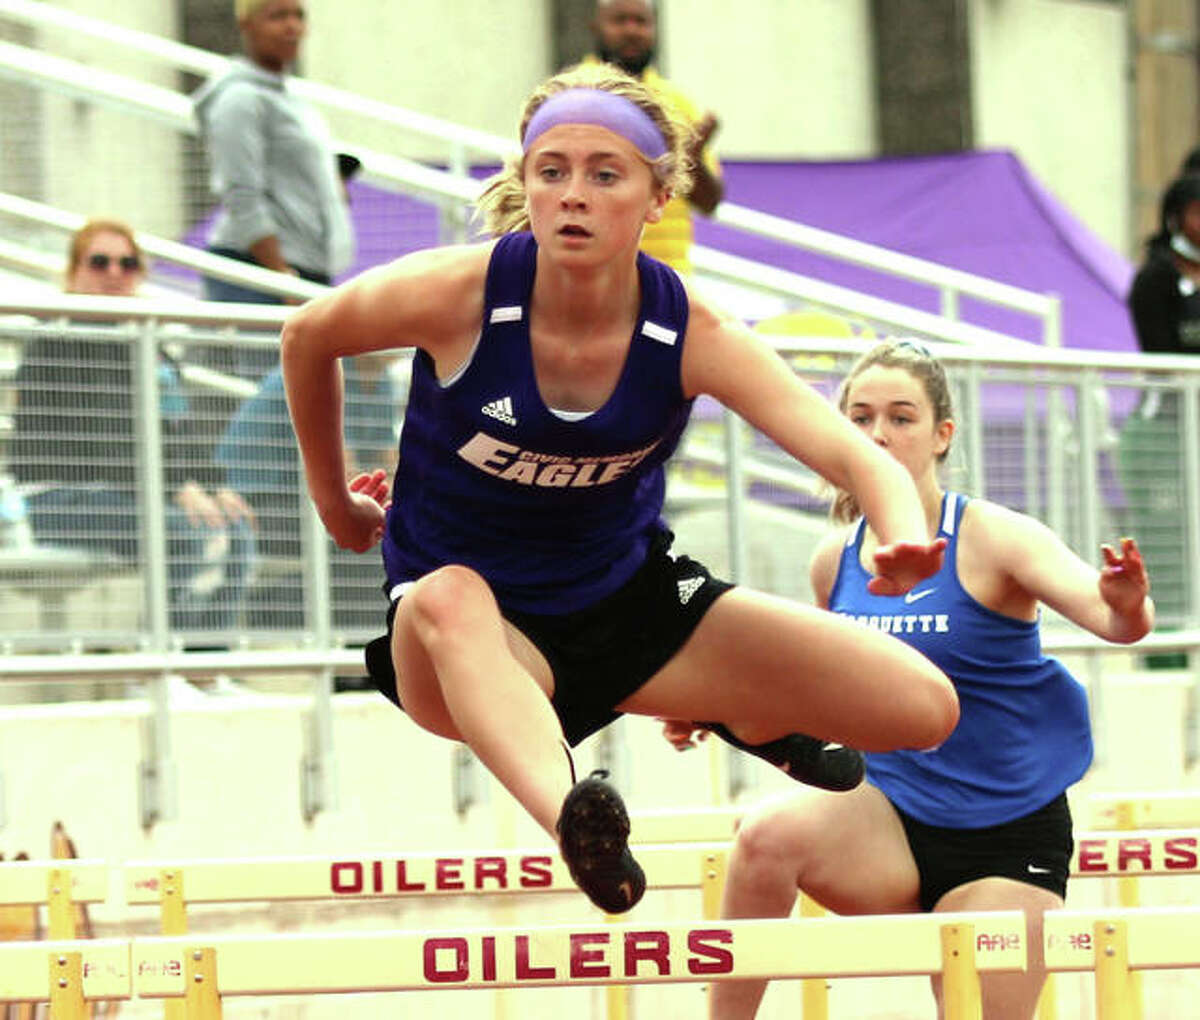 CM sophomore Bella Dugger wins the 100-meter hurdles at the Madison County Meet on May 17 in Wood River. Dugger makes her first state appearance in the event Friday in Charleston.